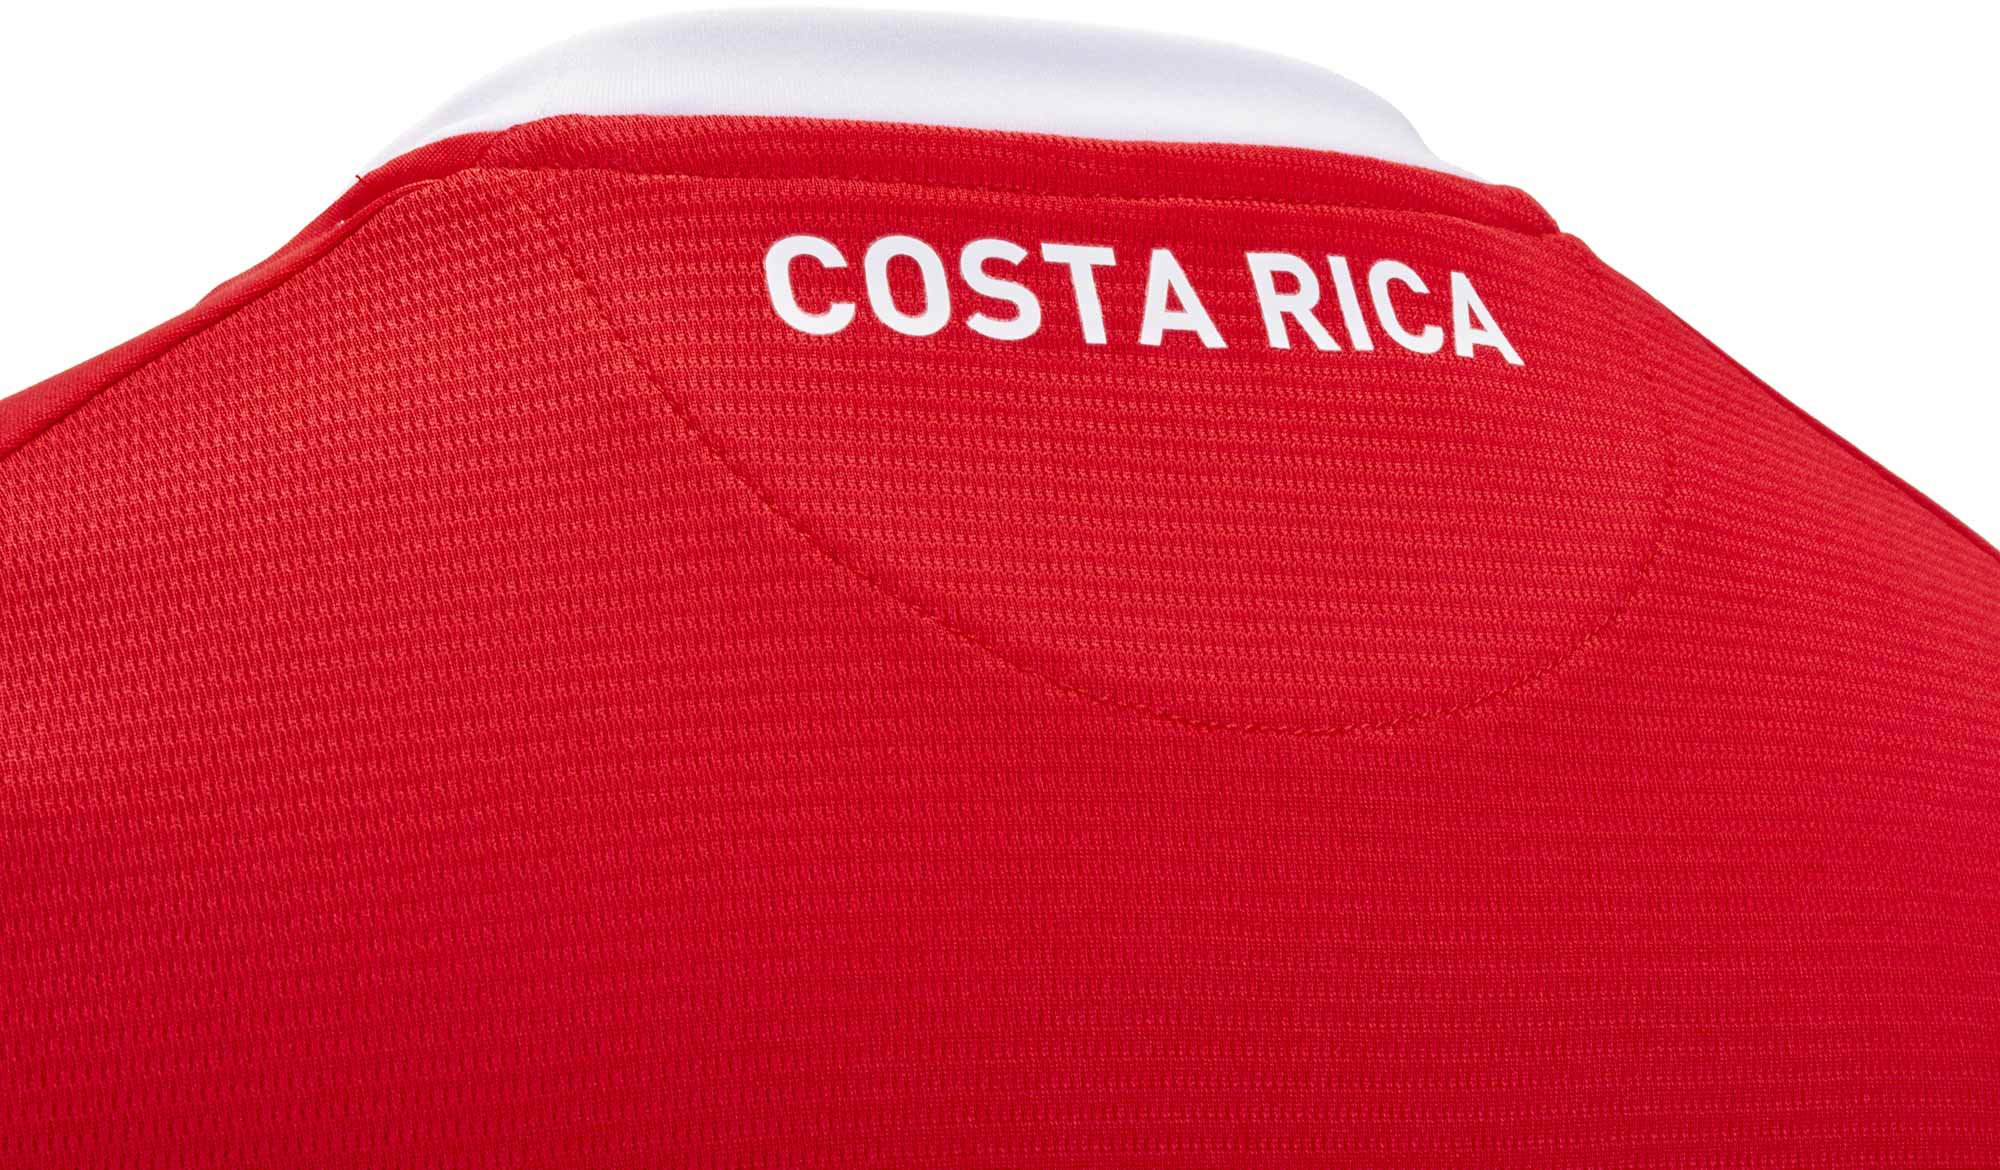 New Balance Costa Rica Home Jersey 18 Red